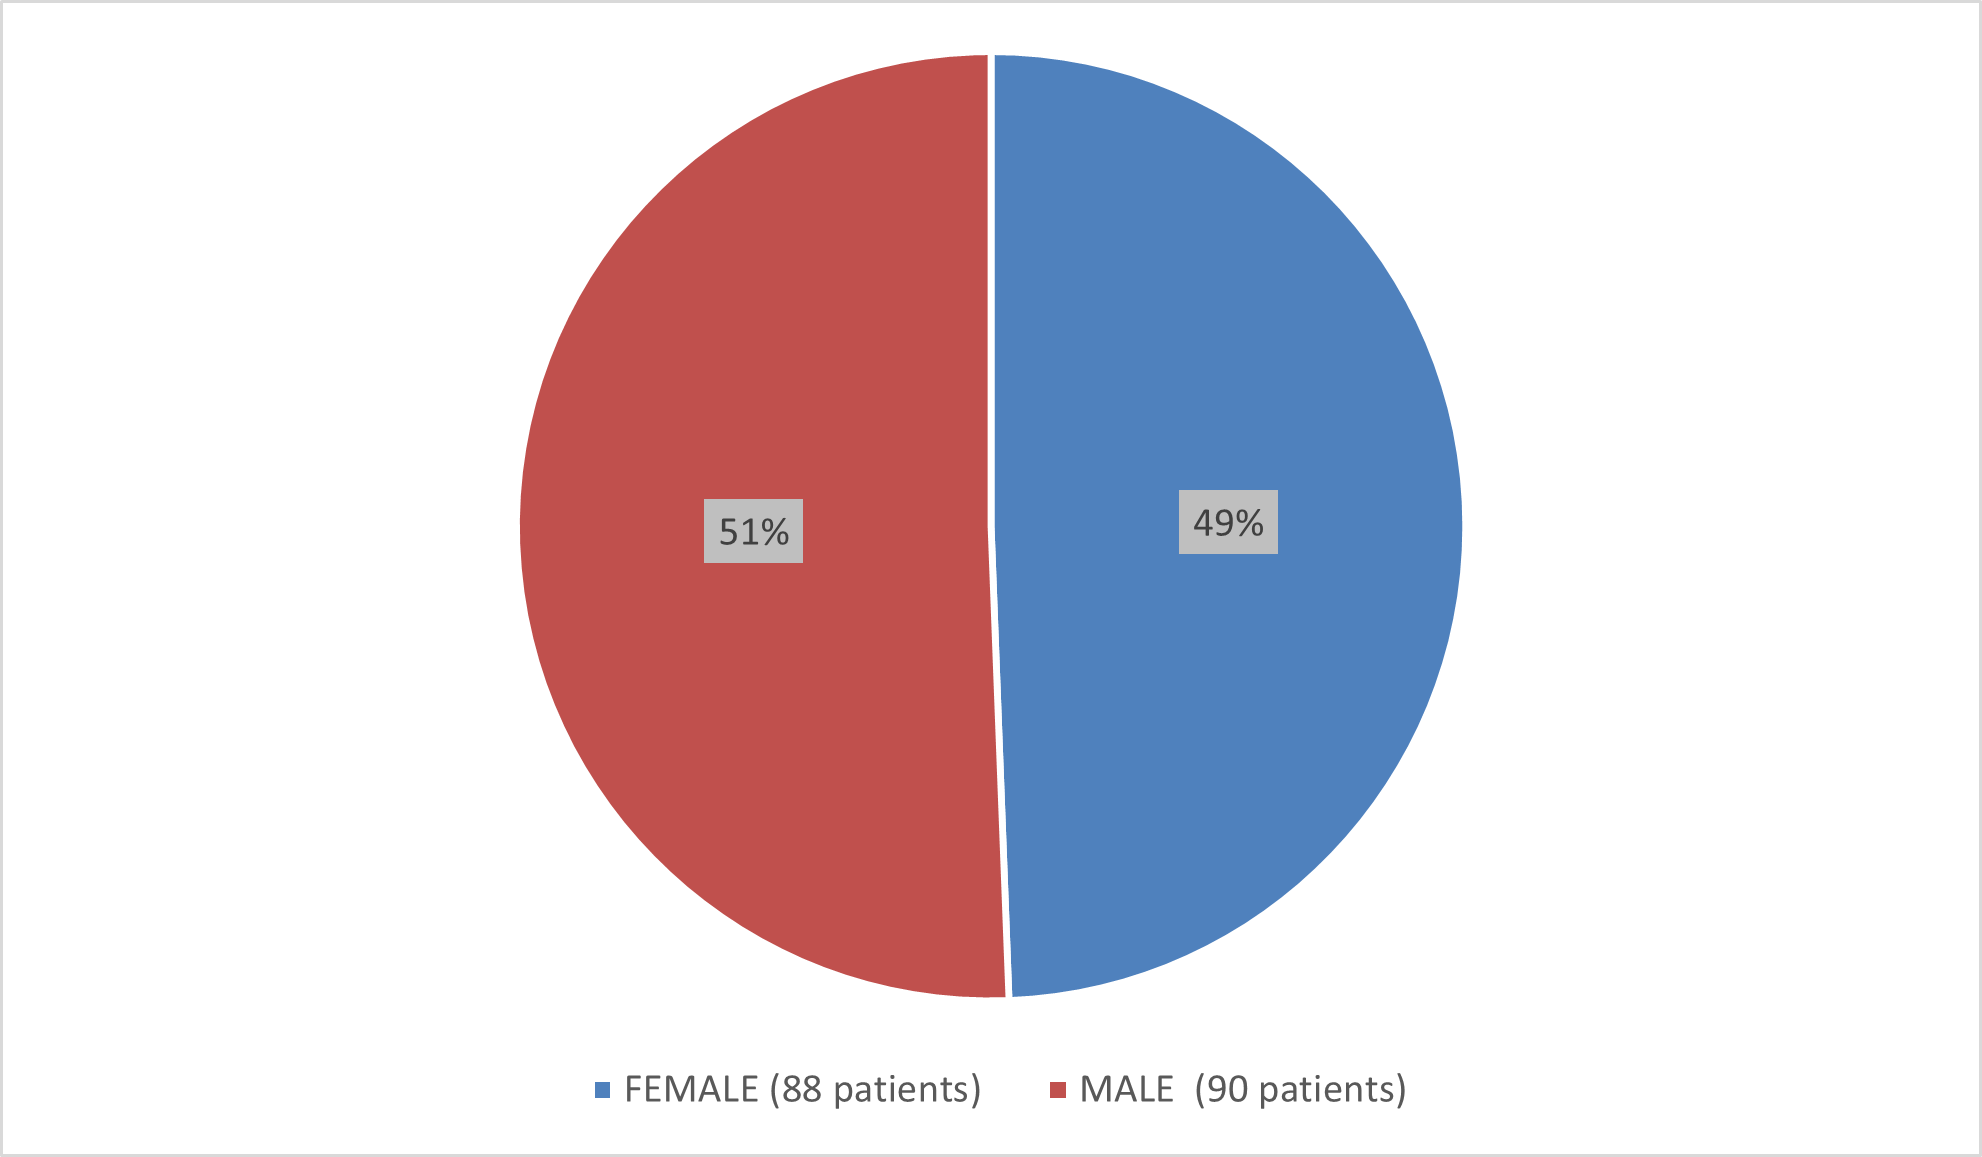 Pie chart summarizing how many male and female patients were in the clinical trial. In total, 90 (49%) male patients and 88 (51%) female patients participated in the clinical trial.